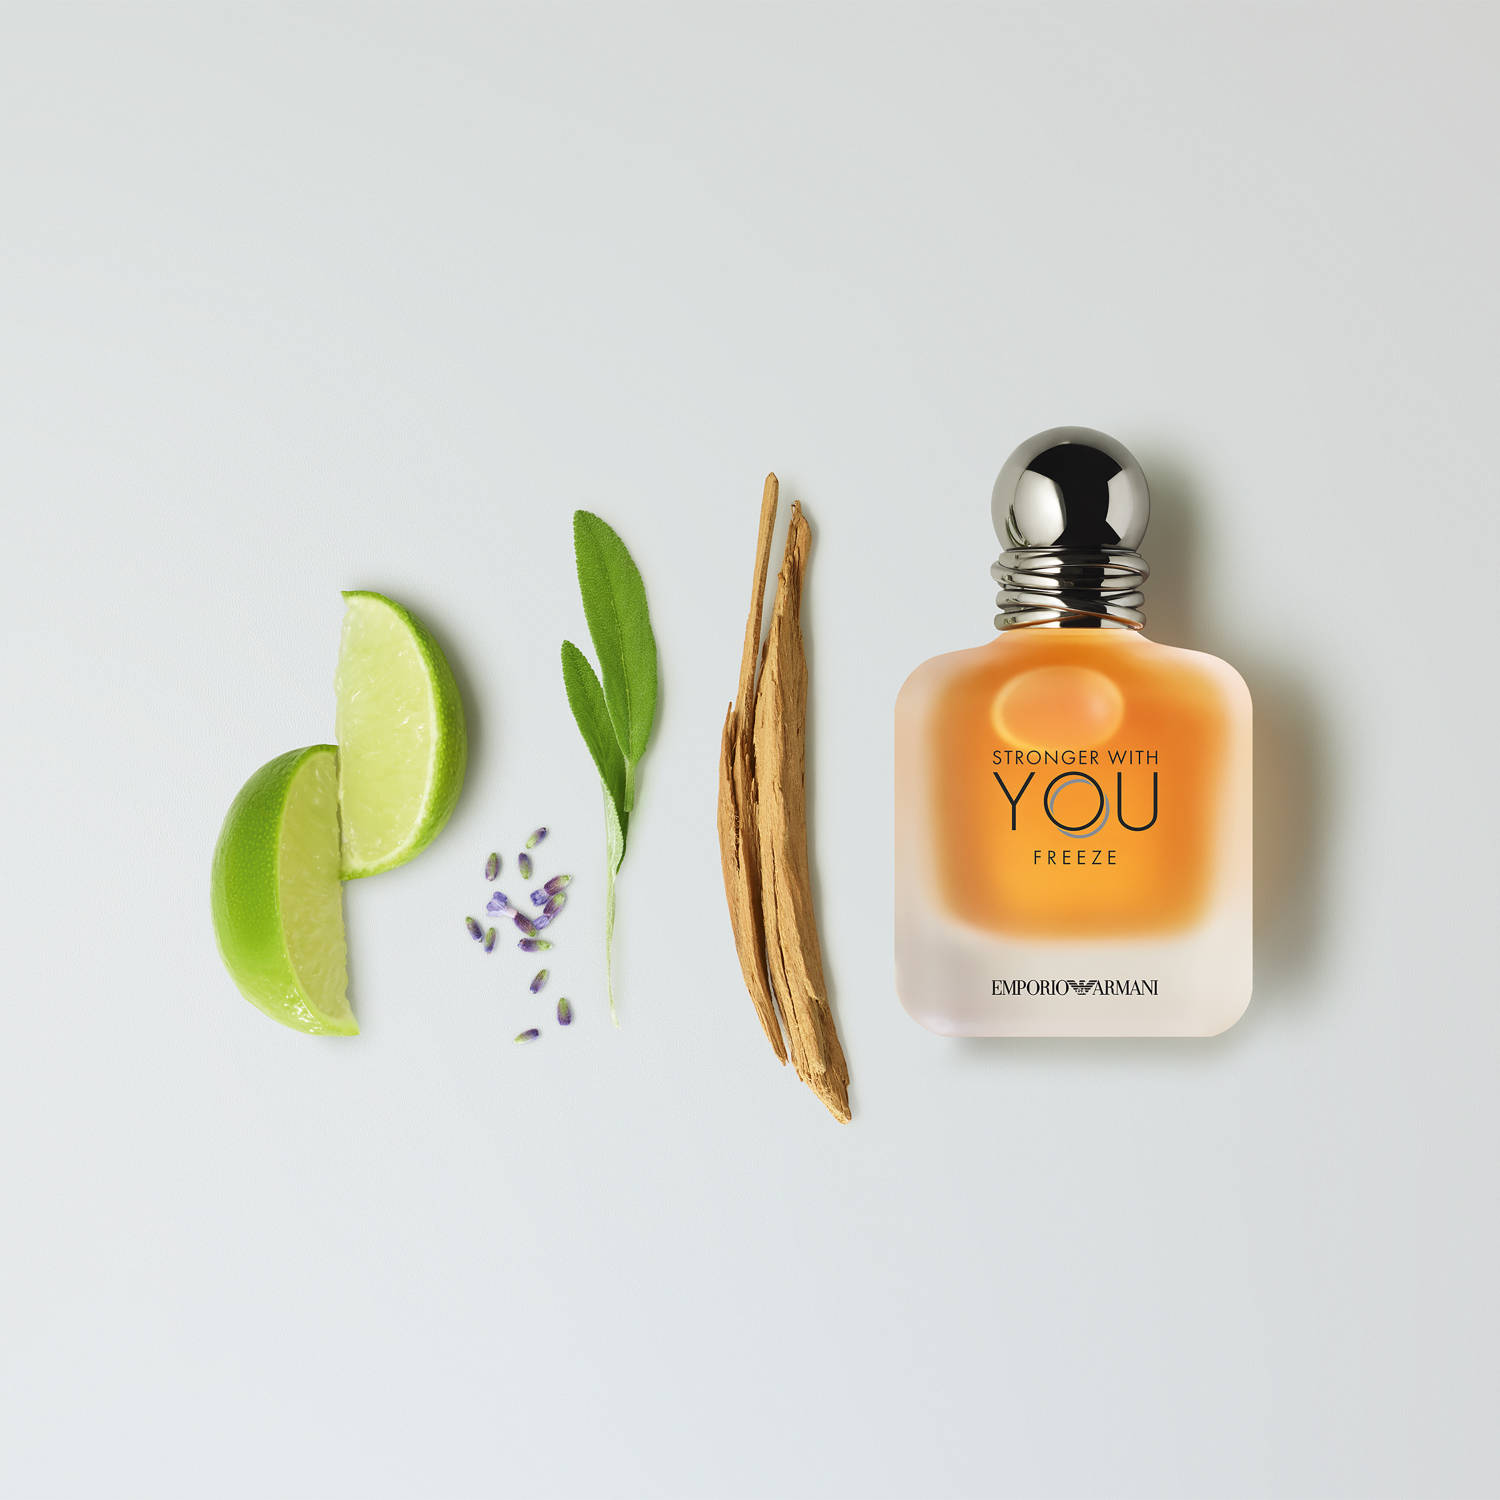 armani stronger with you parfum